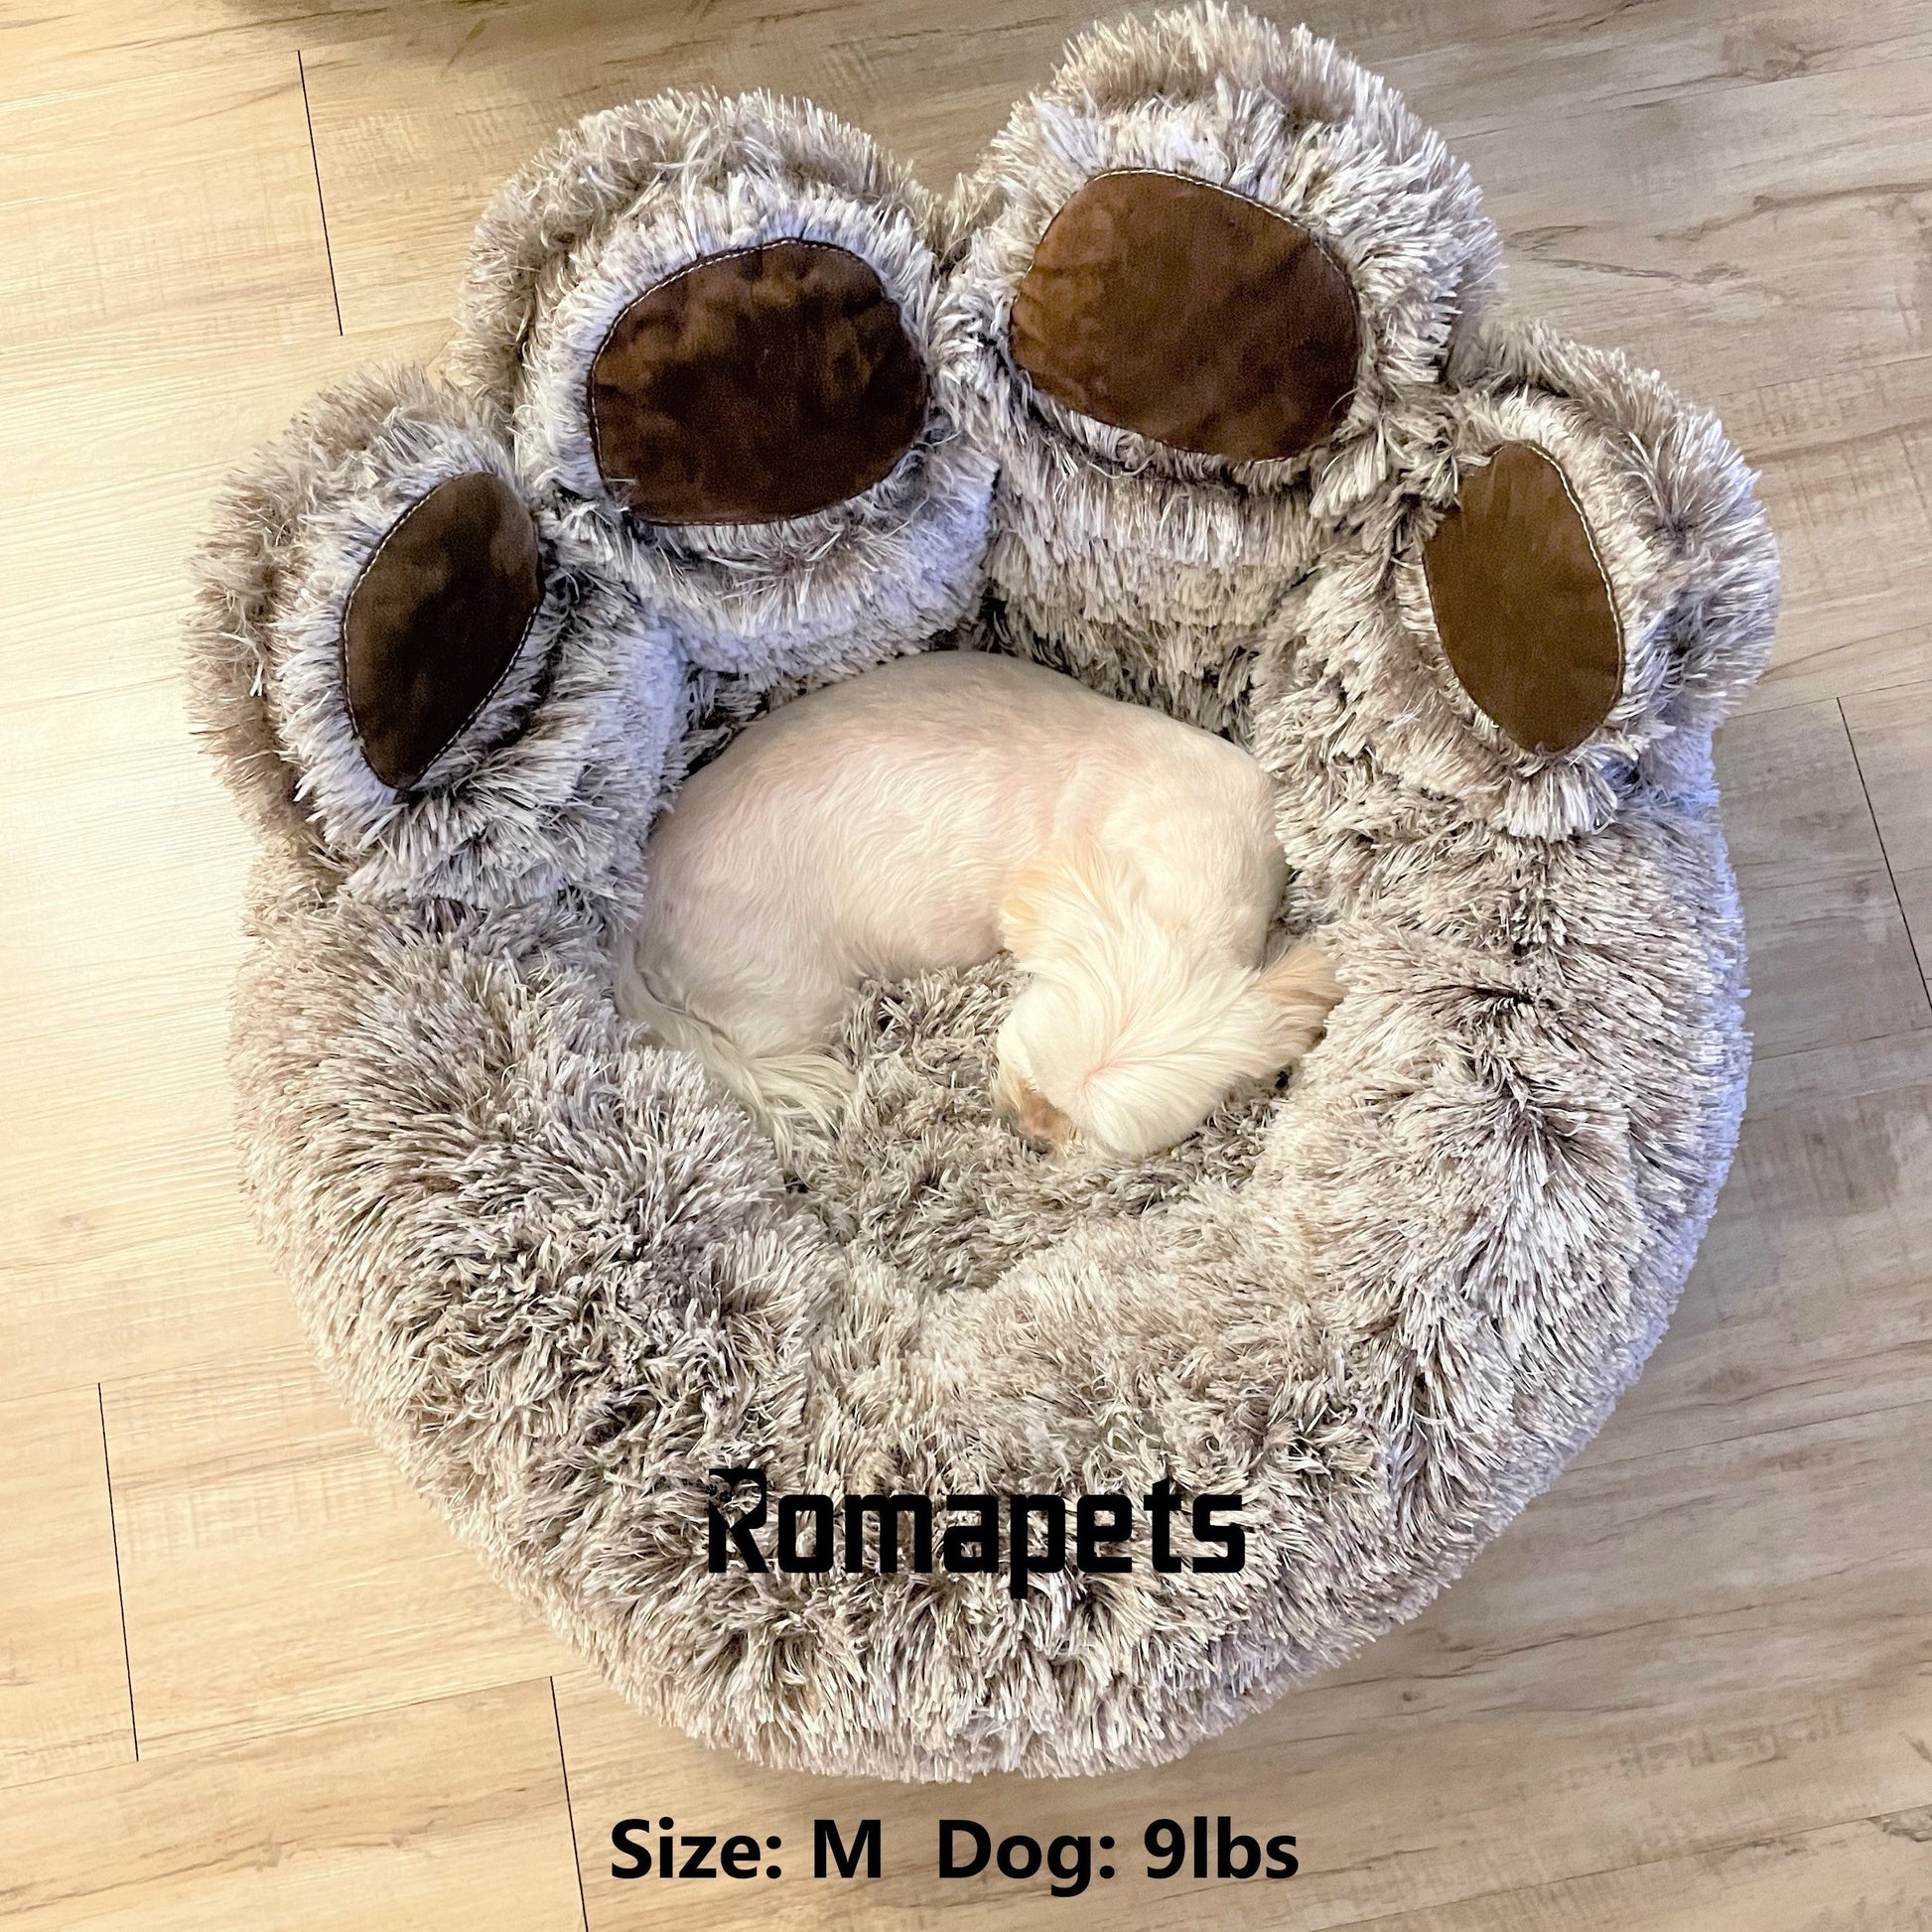 Best spaw dog bed - Paw shape dog bed- Comfortable dog bed - Free Shipping - Best small dog bed - Cozy dog bed - Plush - Softest 